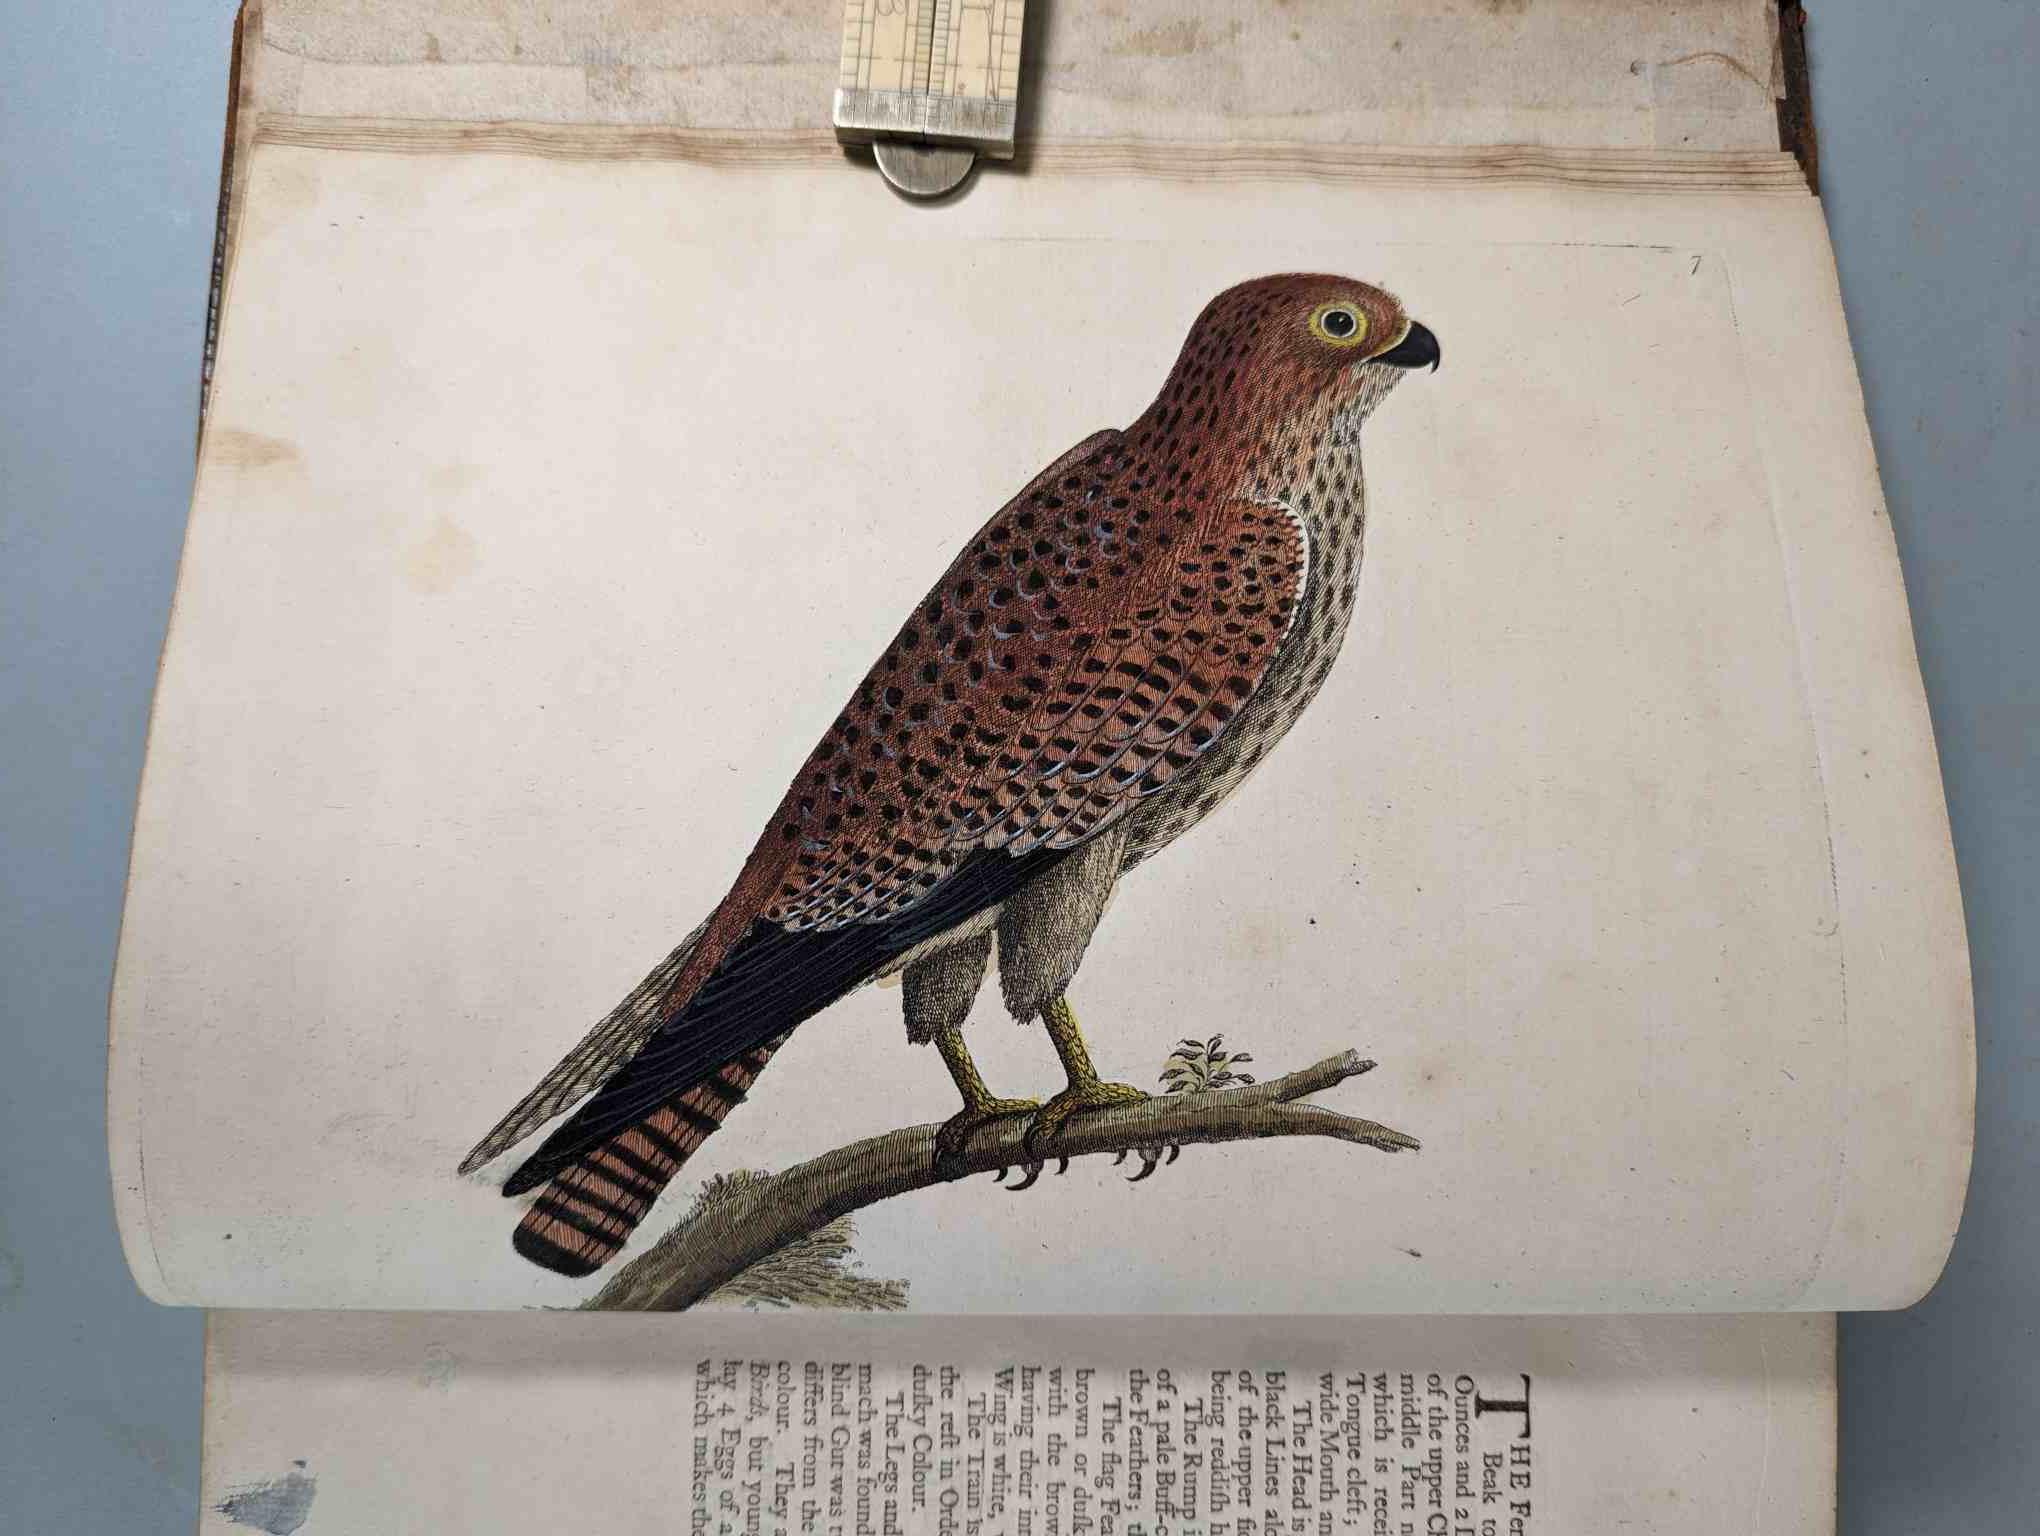 ALBIN, Eleazar. A Natural History of Birds, to which are added, Notes and Observations by W. - Image 6 of 208